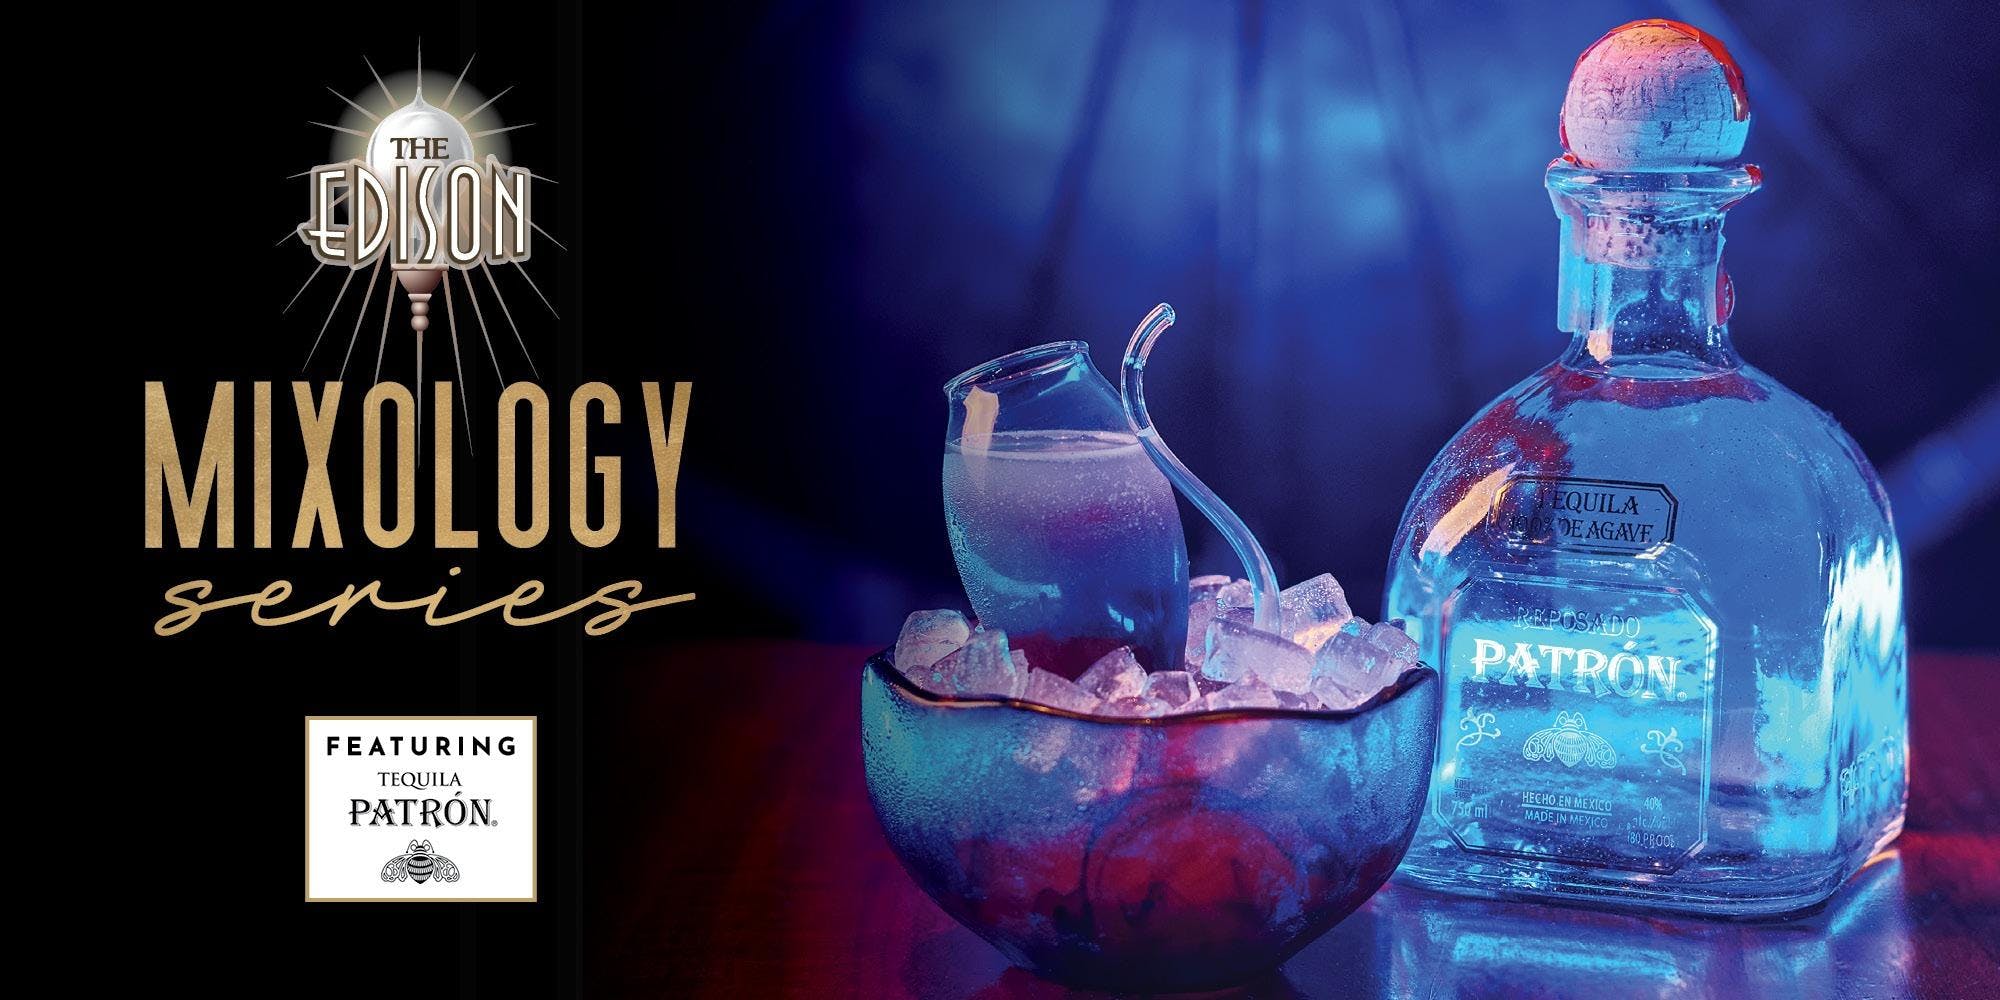 Tickets on sale for the December Mixology Series at The Edison in Disney Springs based around Patron Tequila